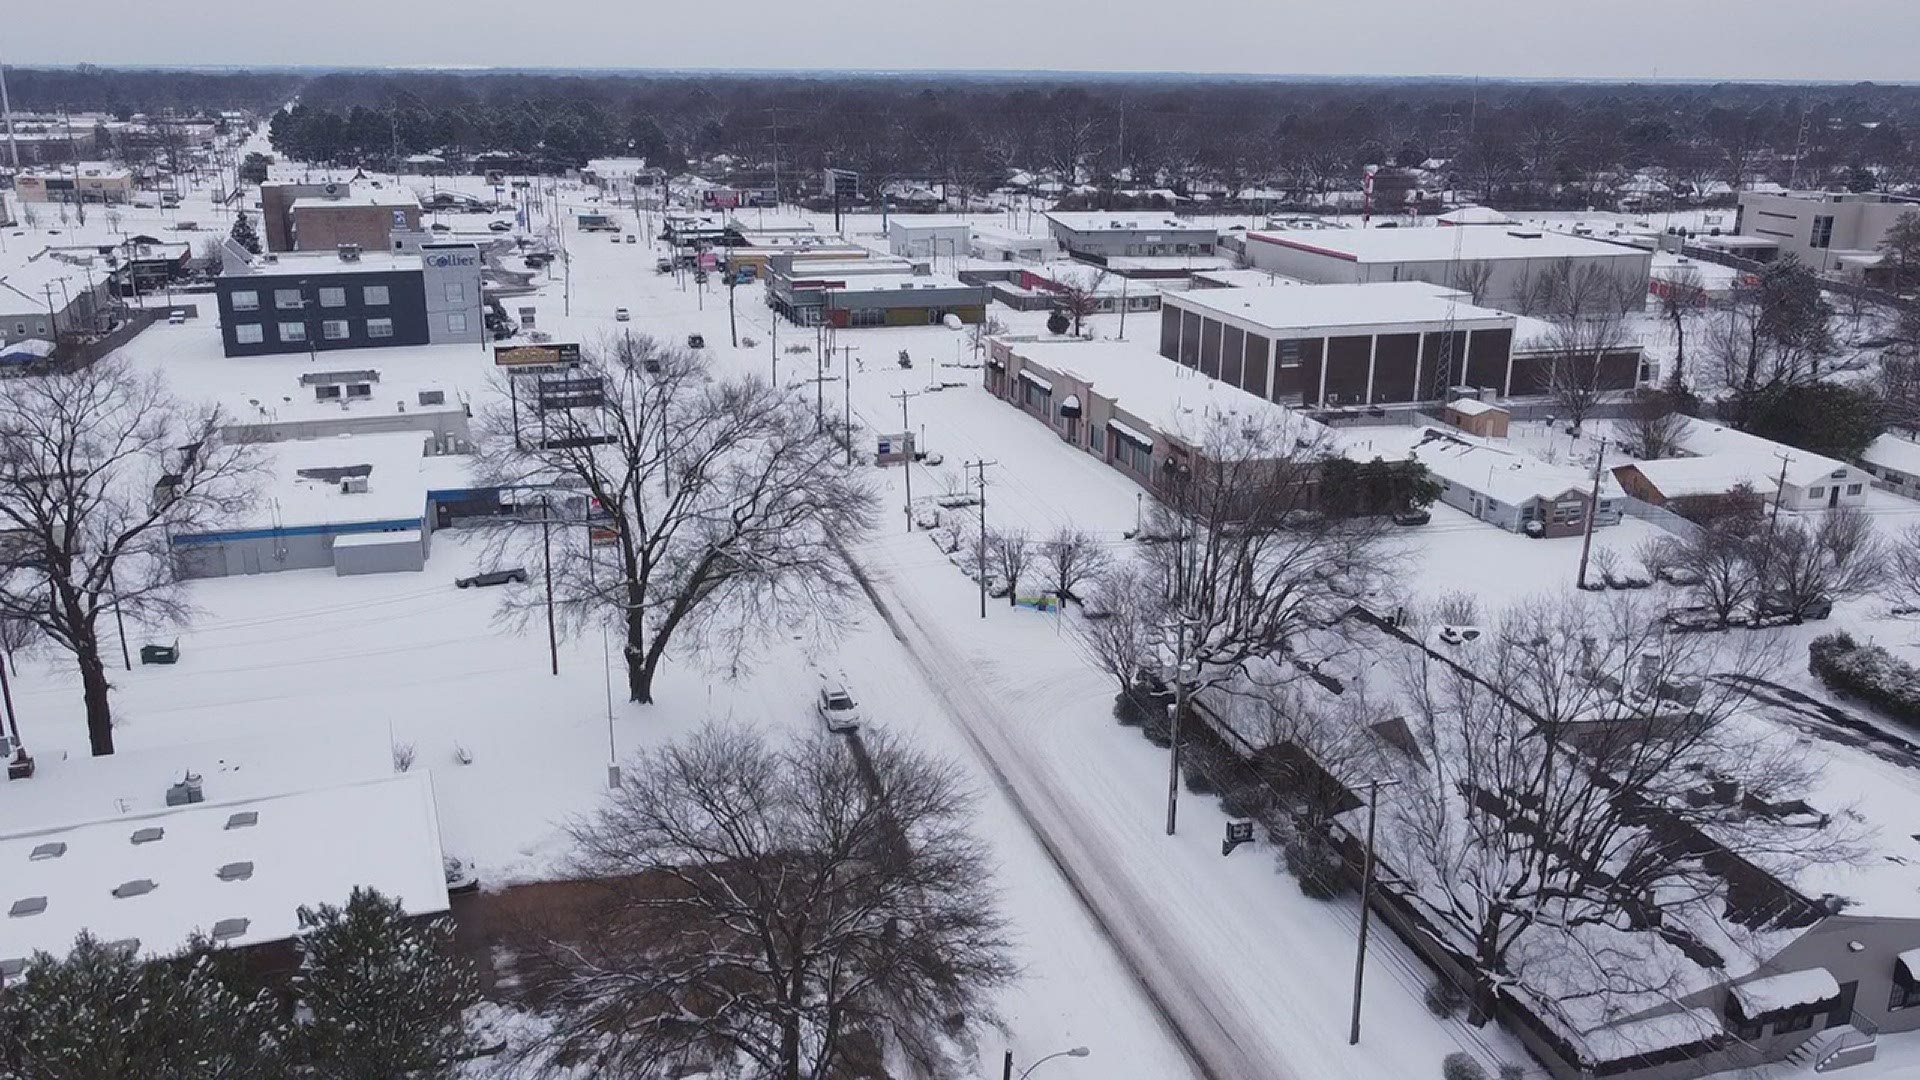 Local 24 News drone video of the snow in east Memphis on Friday, February 18, 2021.